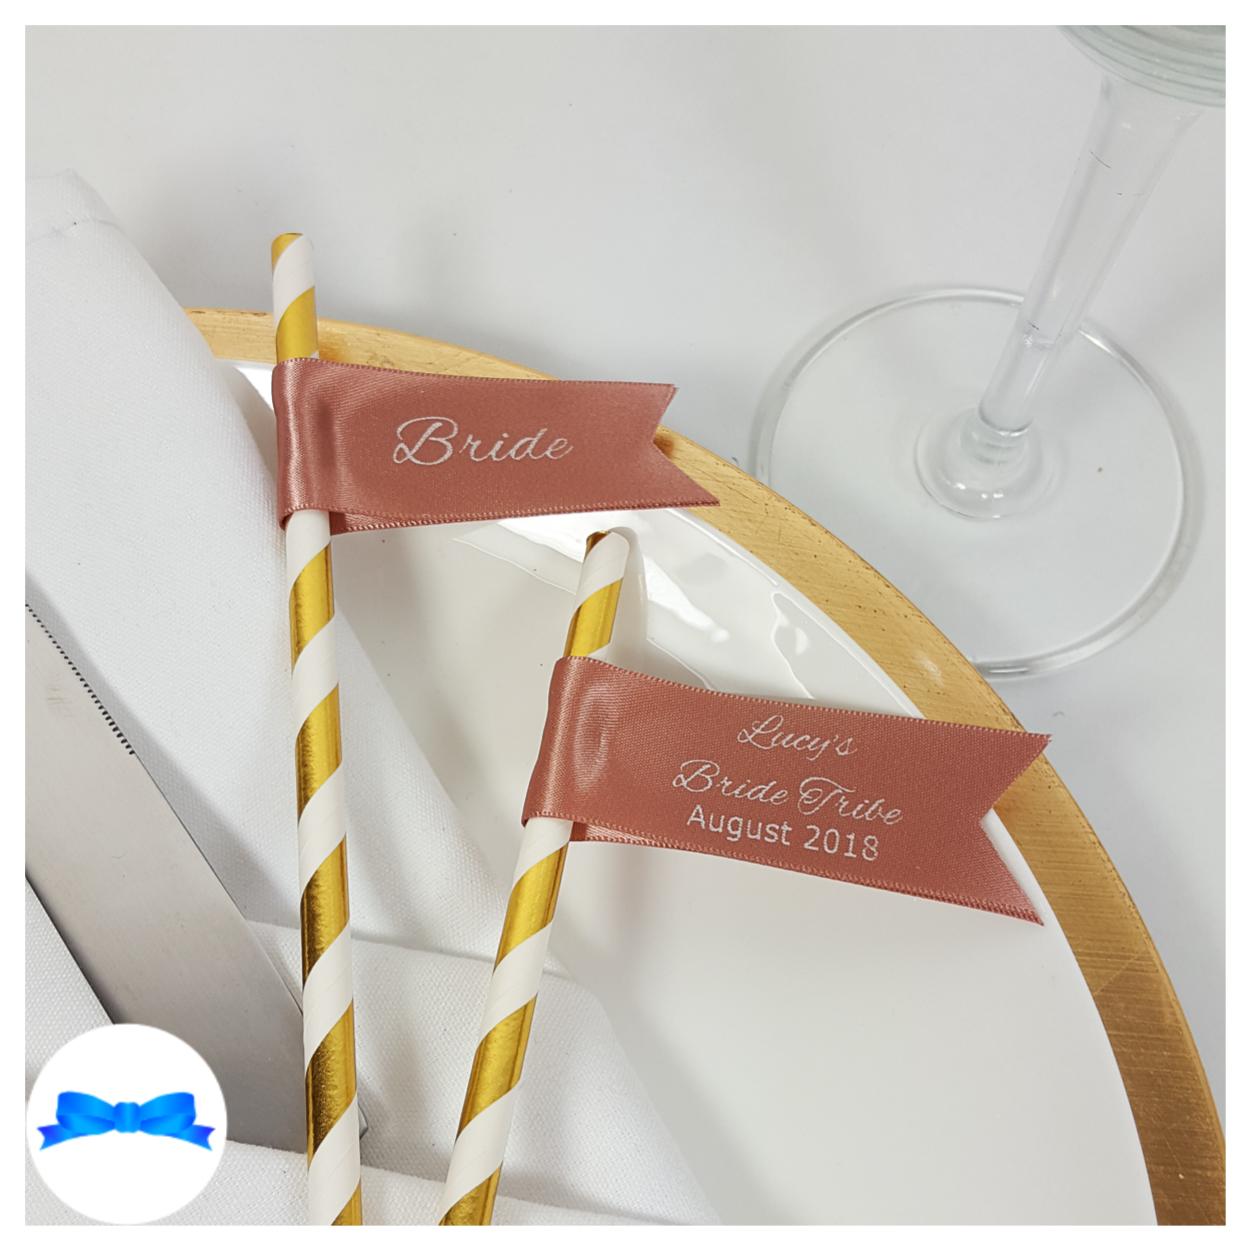 Hen party personalised straws plus free bride straw